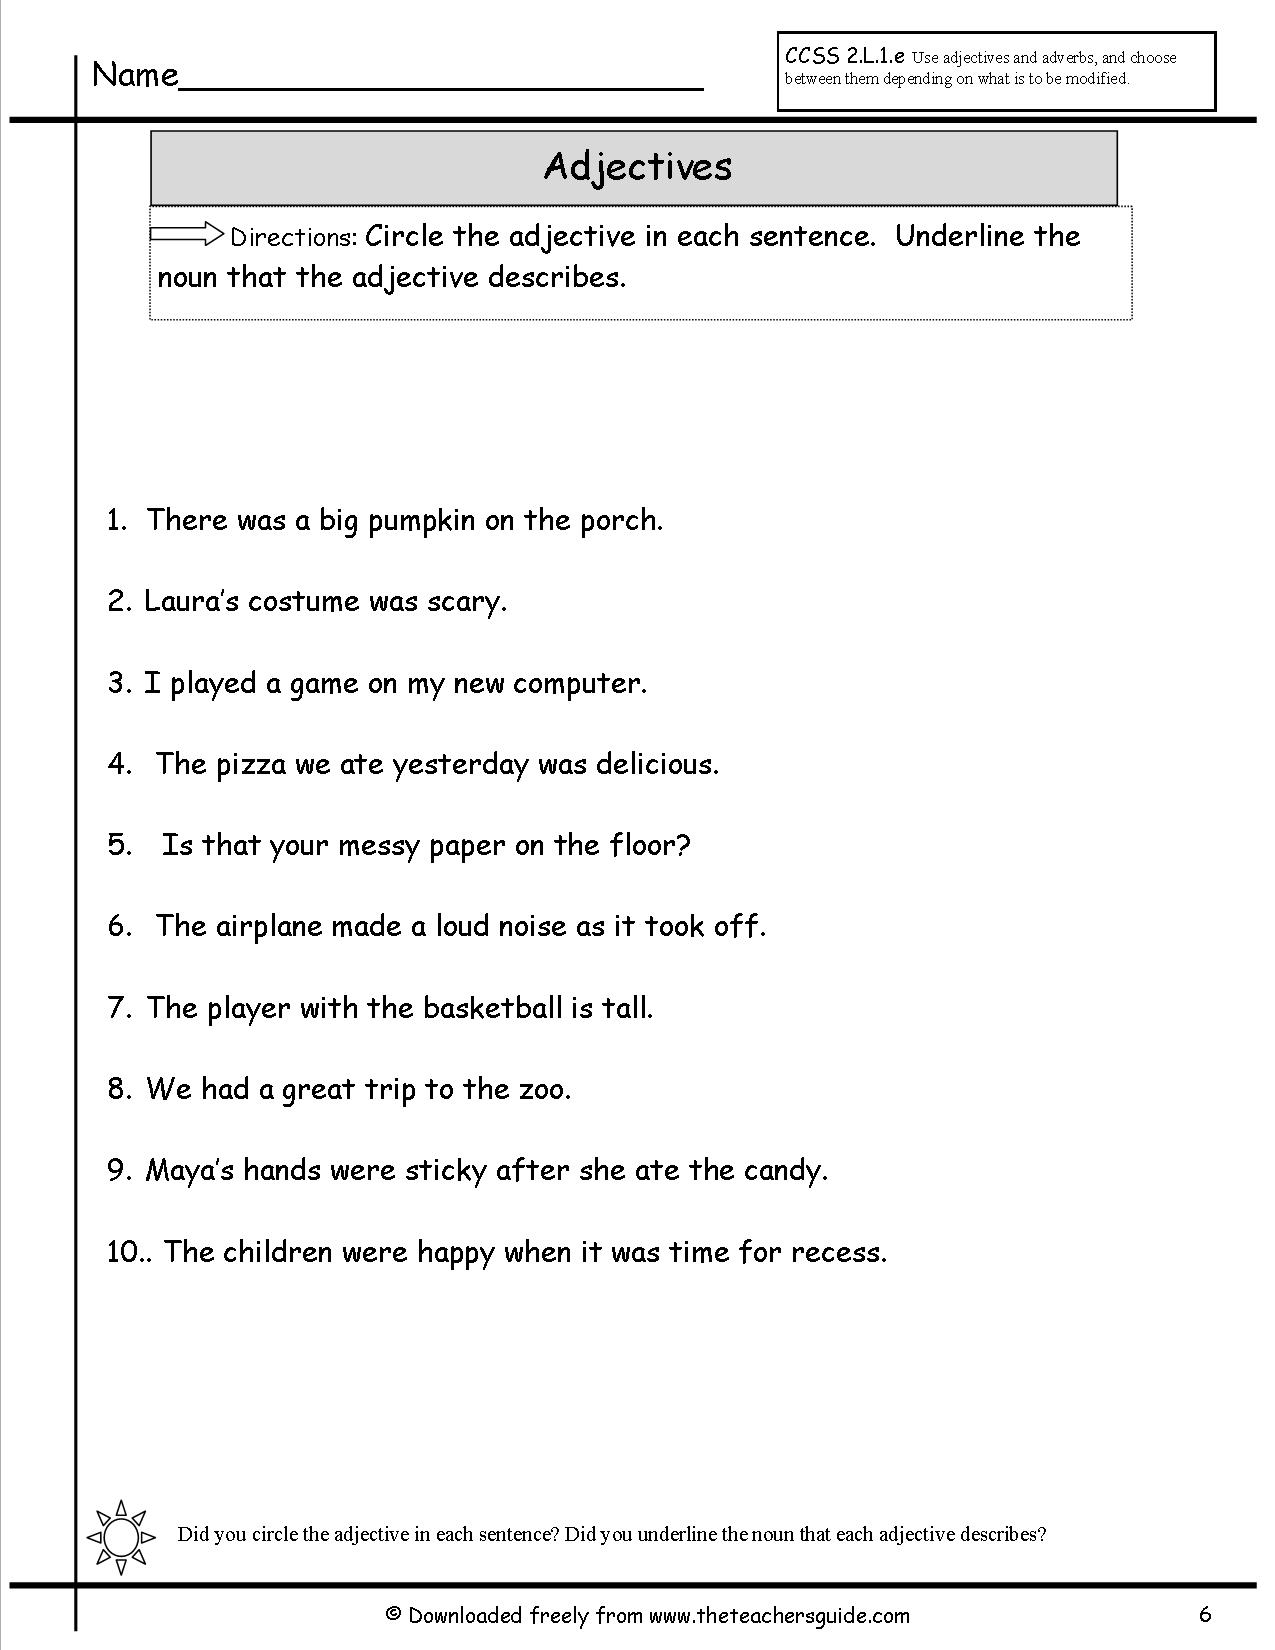 15-best-images-of-nouns-and-adjectives-worksheets-identifying-nouns-it-is-a-4-page-worksheet